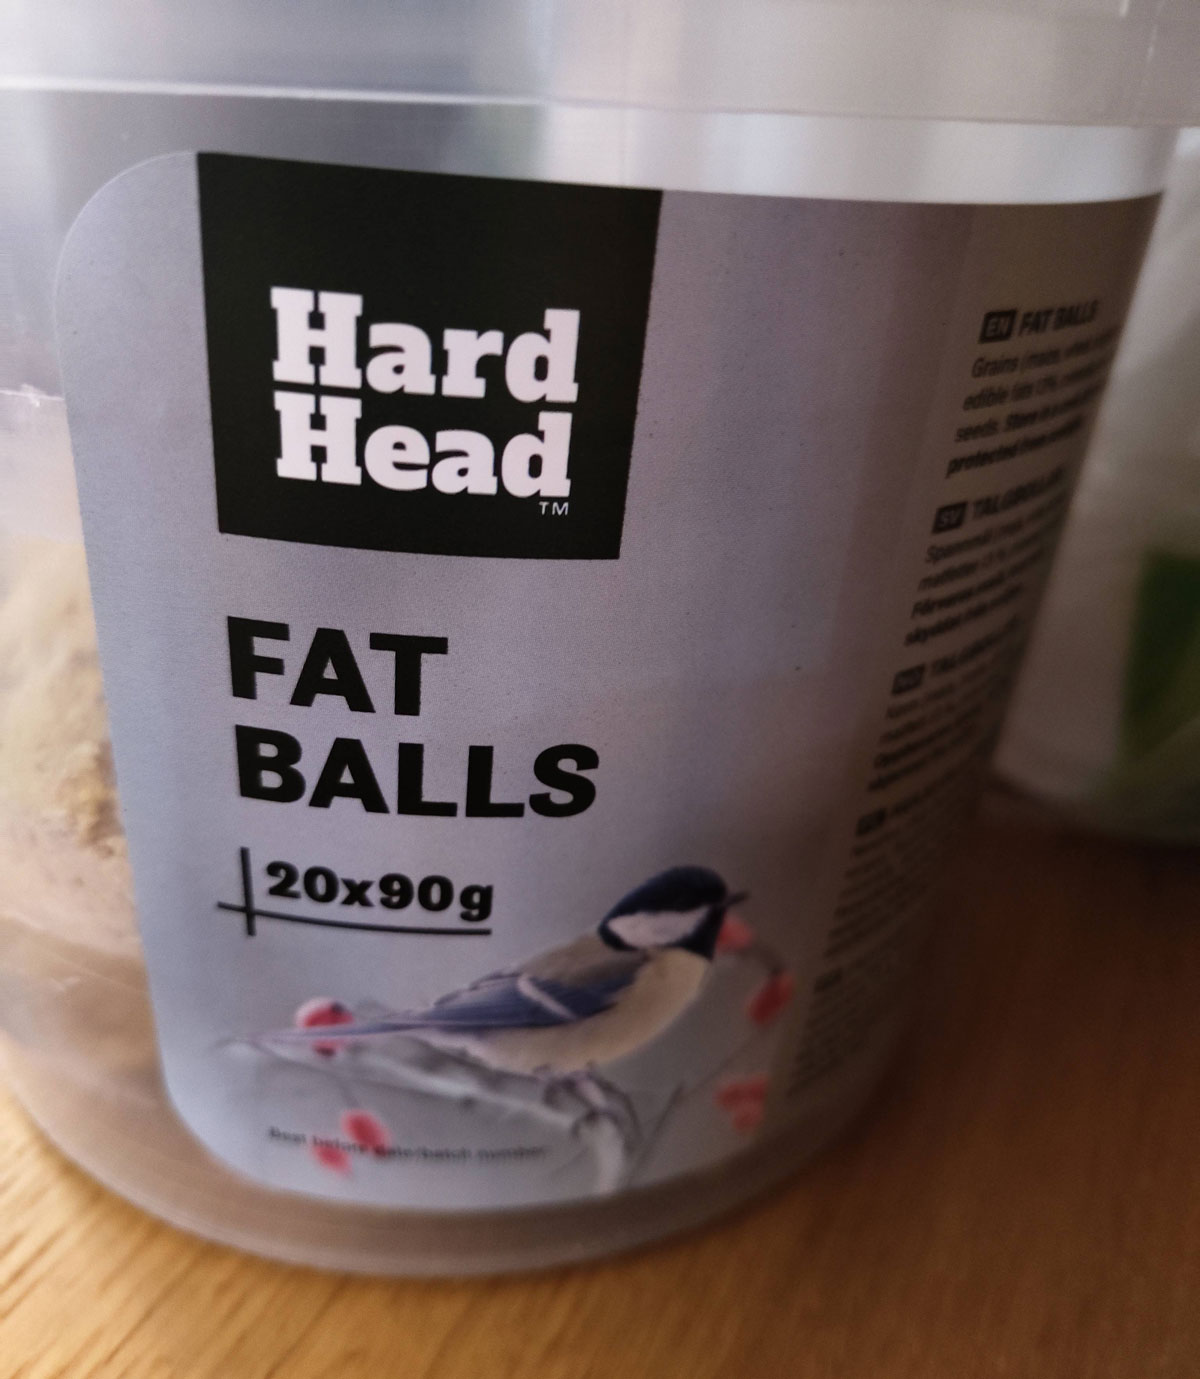 Possibly not the best bird-feed name when that's your company name